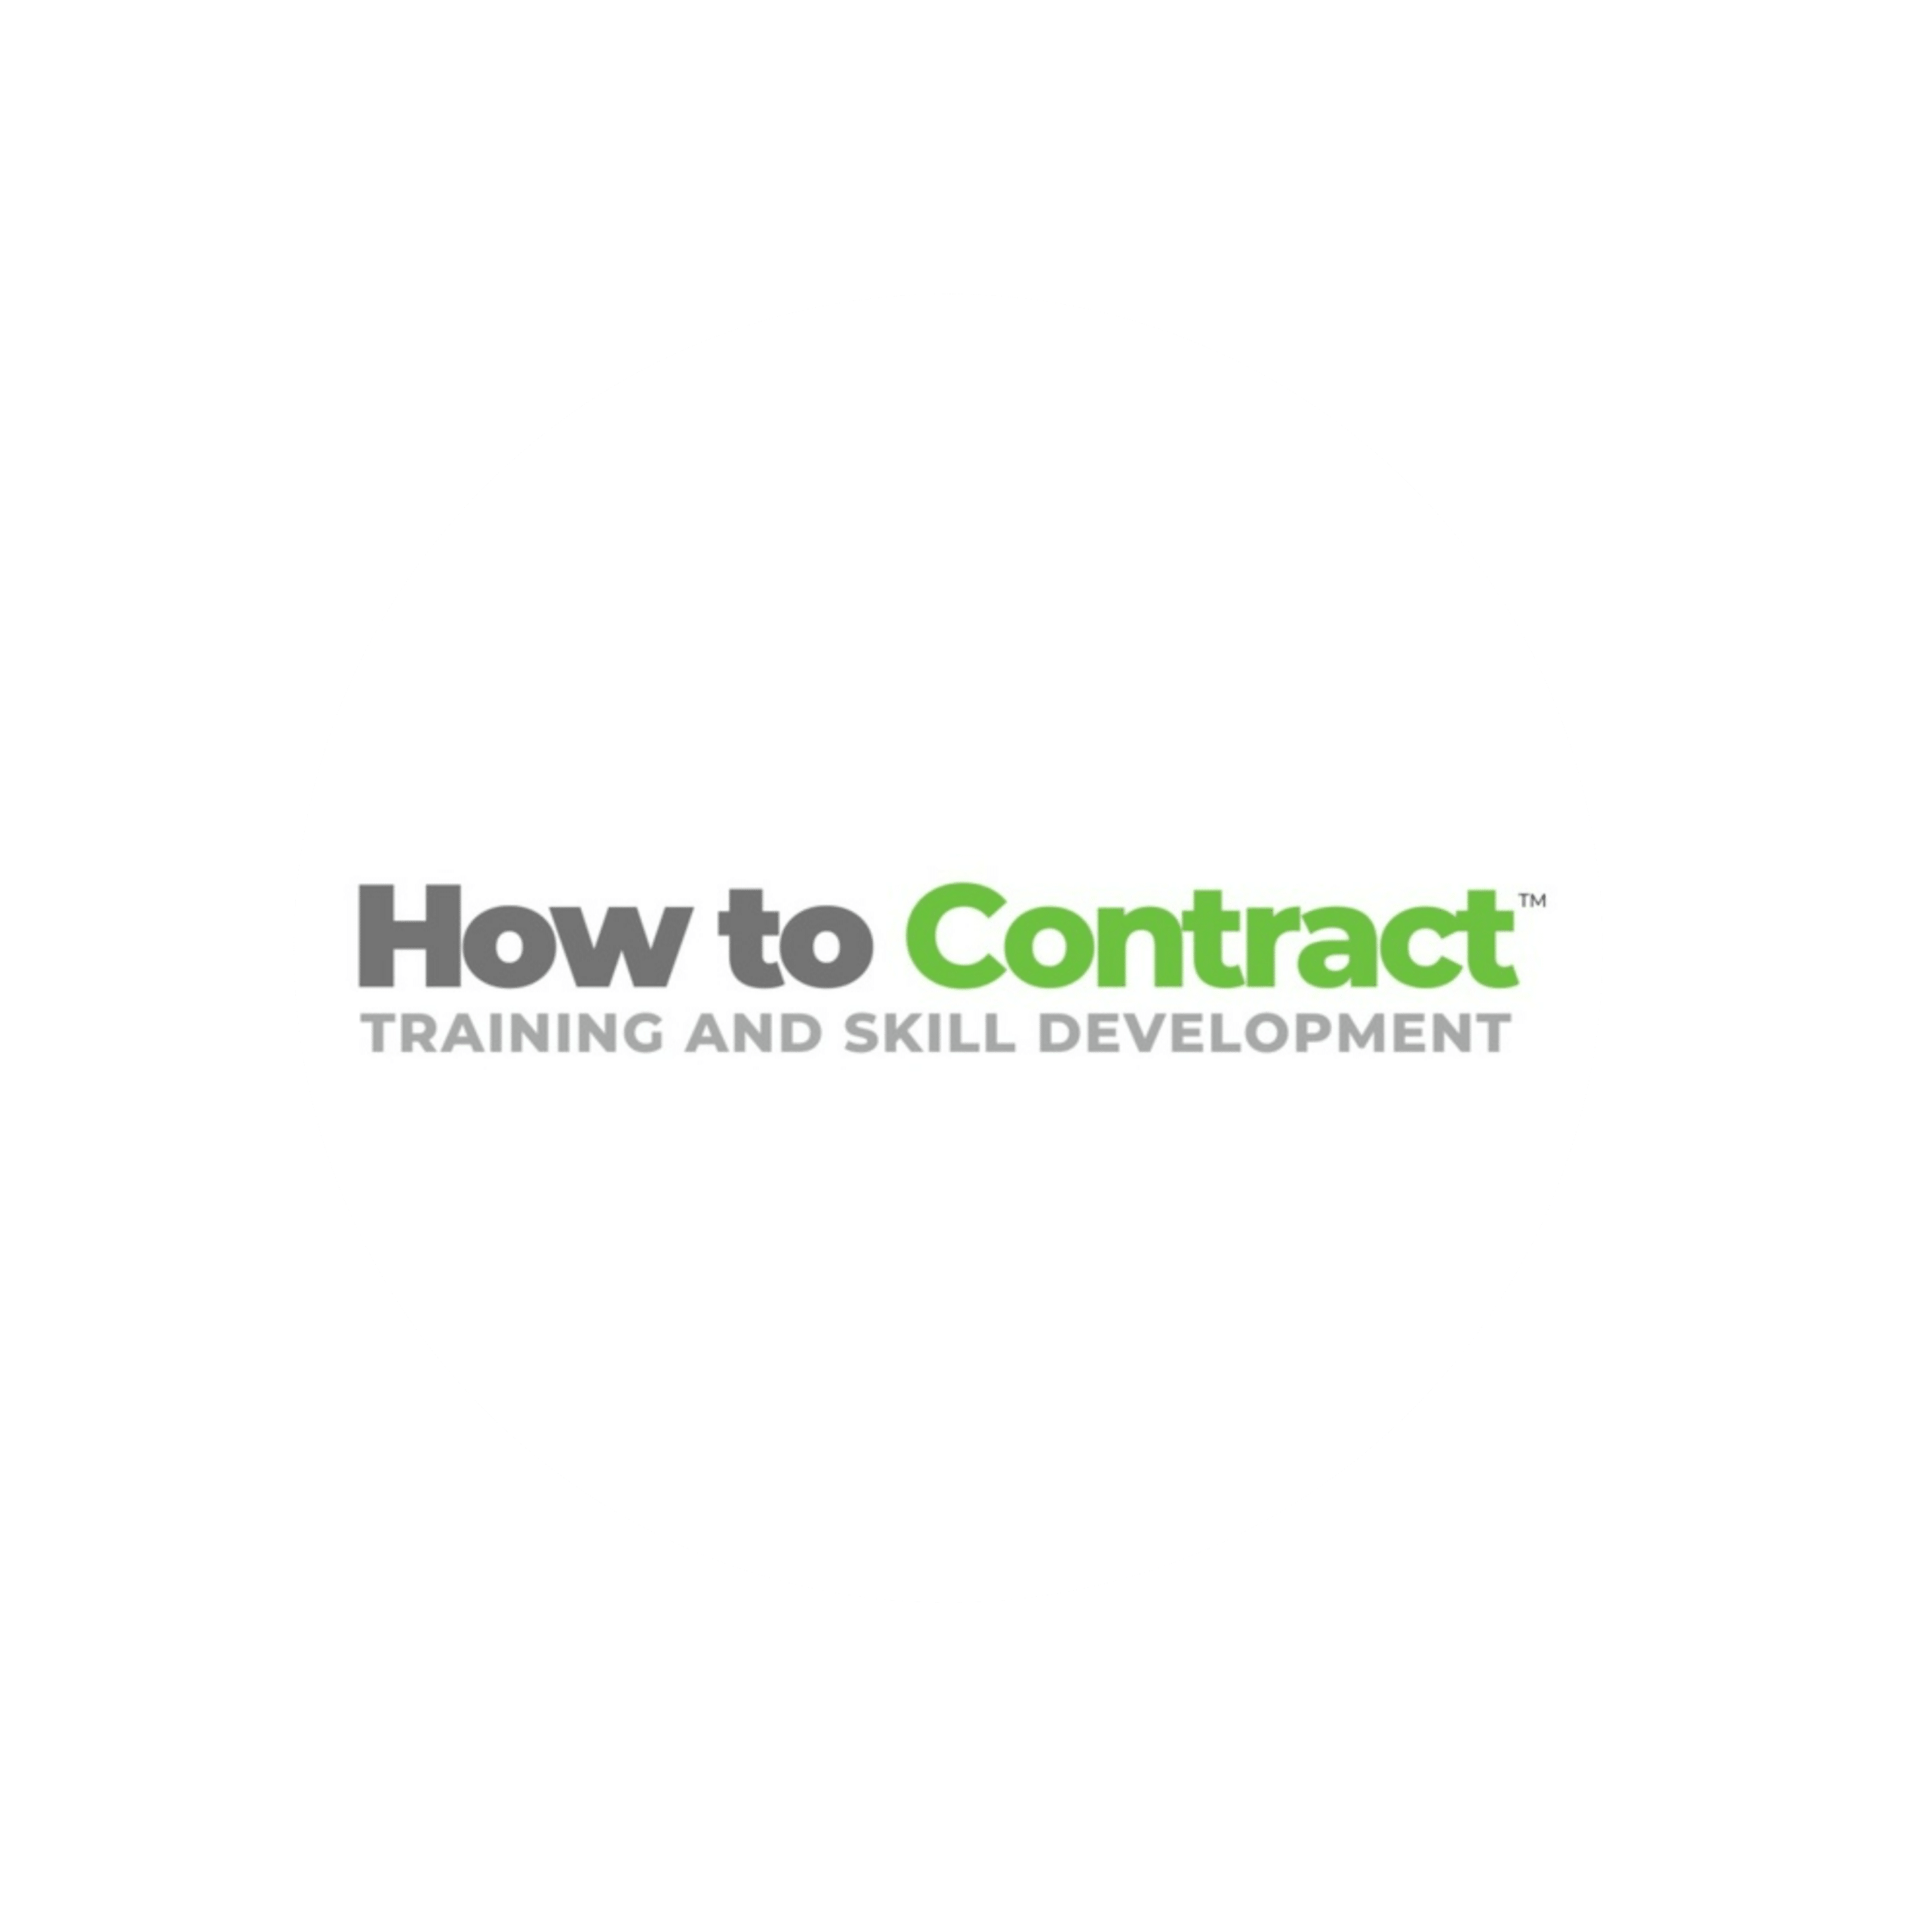 How to Contract